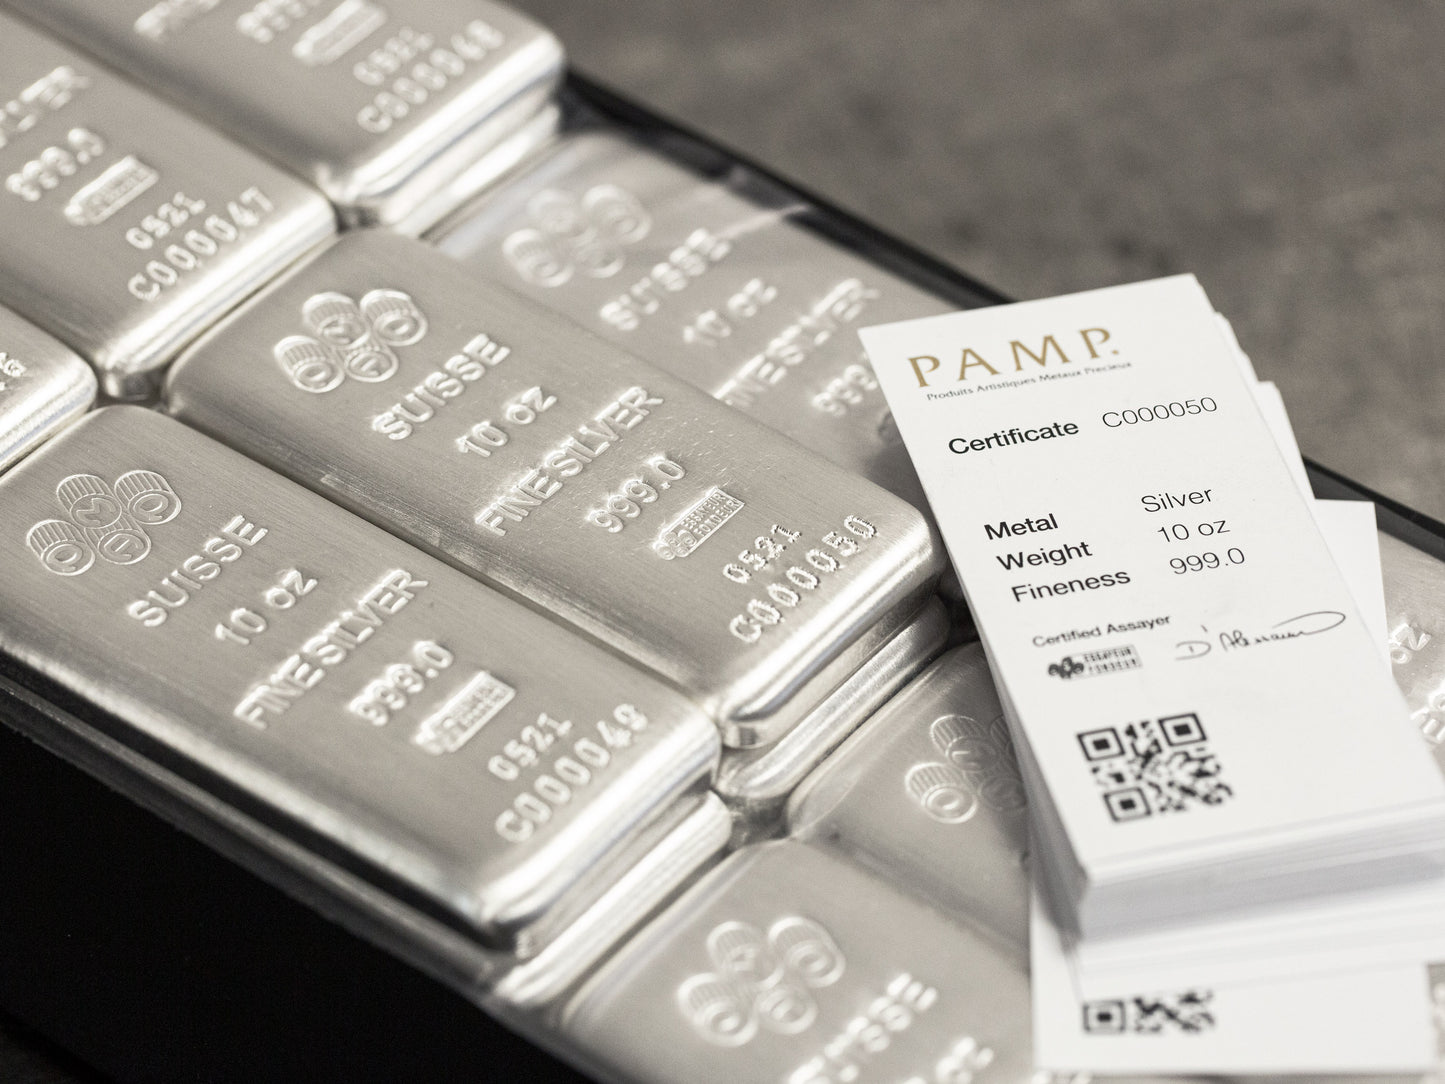 10 oz Silver Cast Bar - PAMP Suisse  - .999 Ag - Certificate of Authenticity